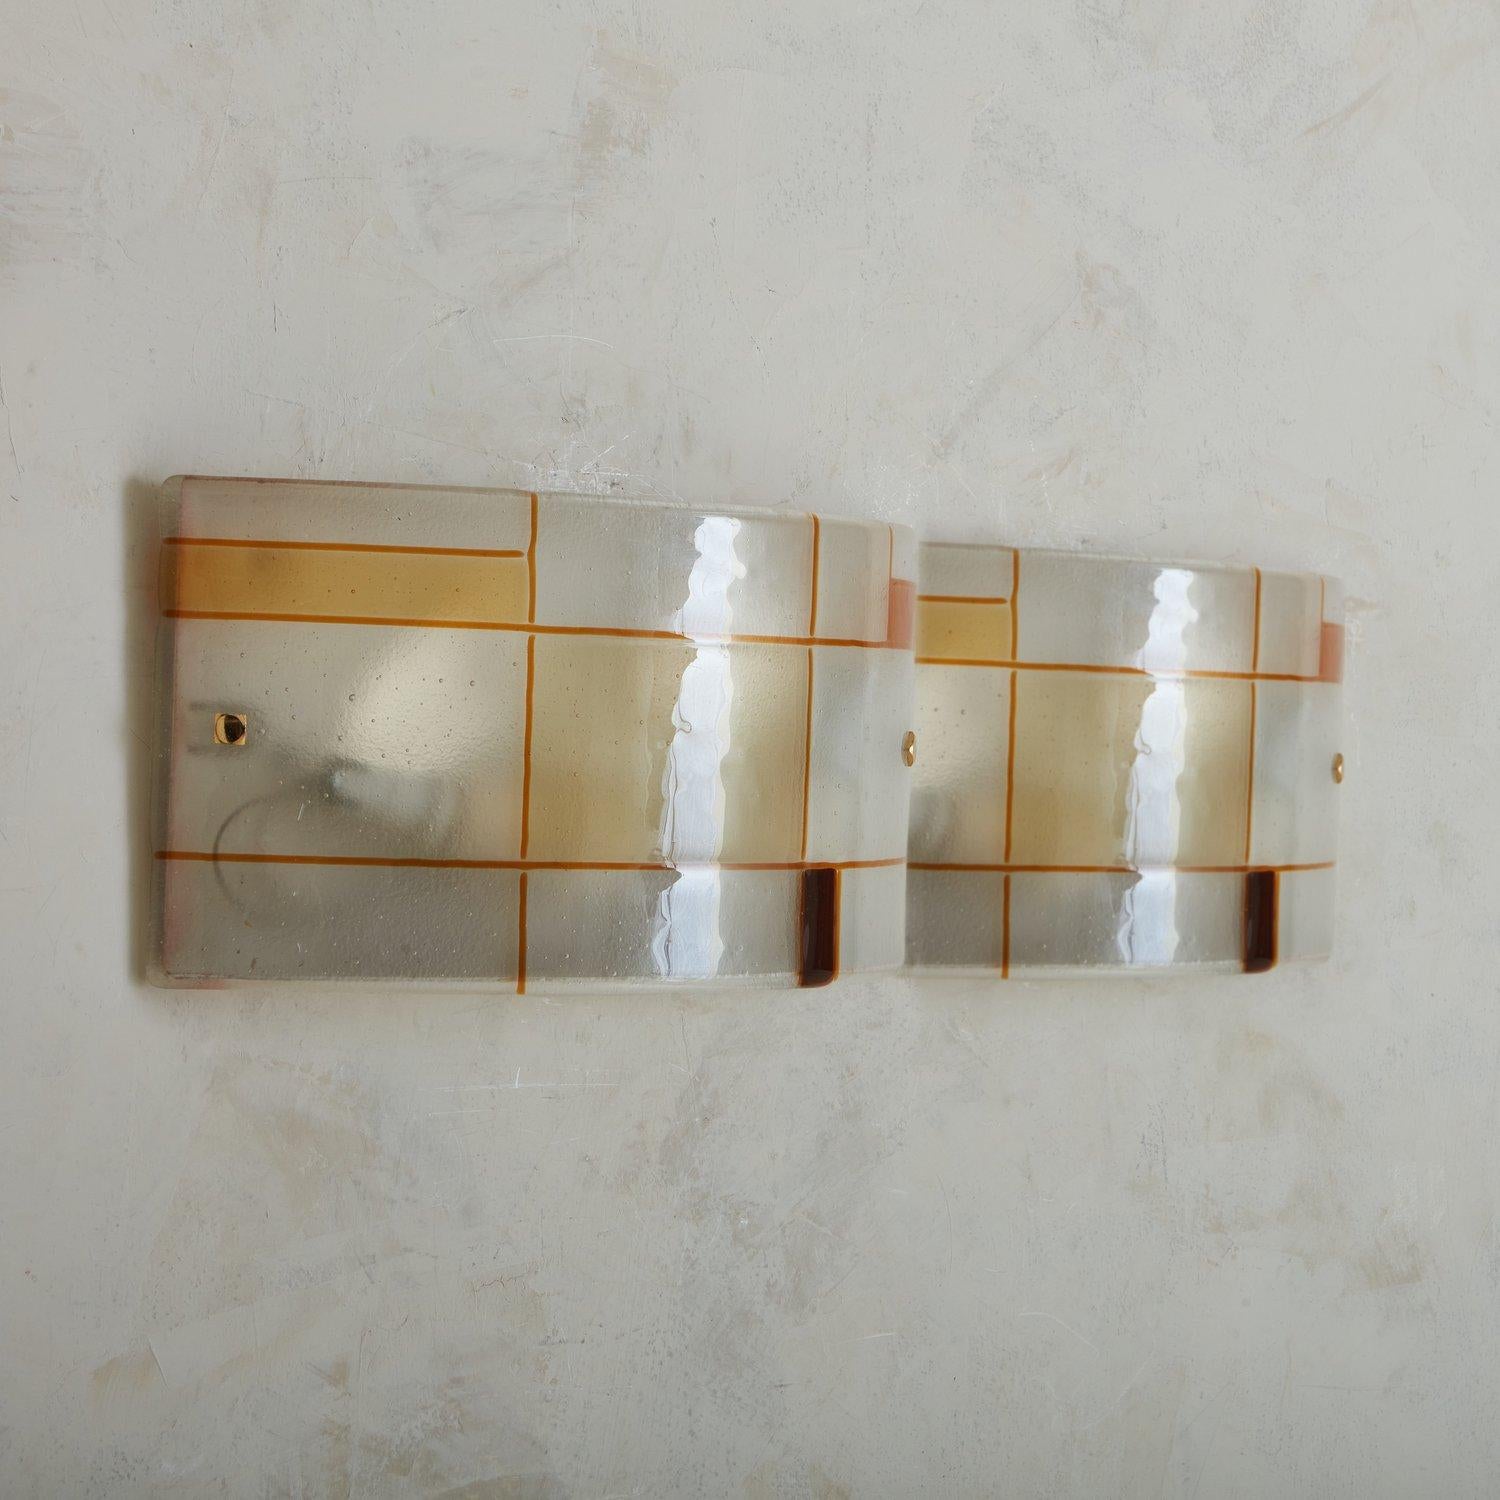 A 1960s hand blown Murano glass sconce featuring a curved shade with a Mondrian-inspired geometric design with orange and amber hues. The shade sits in a demilune cream metal base with squiggle cutout details. This sconce has brass hardware and can